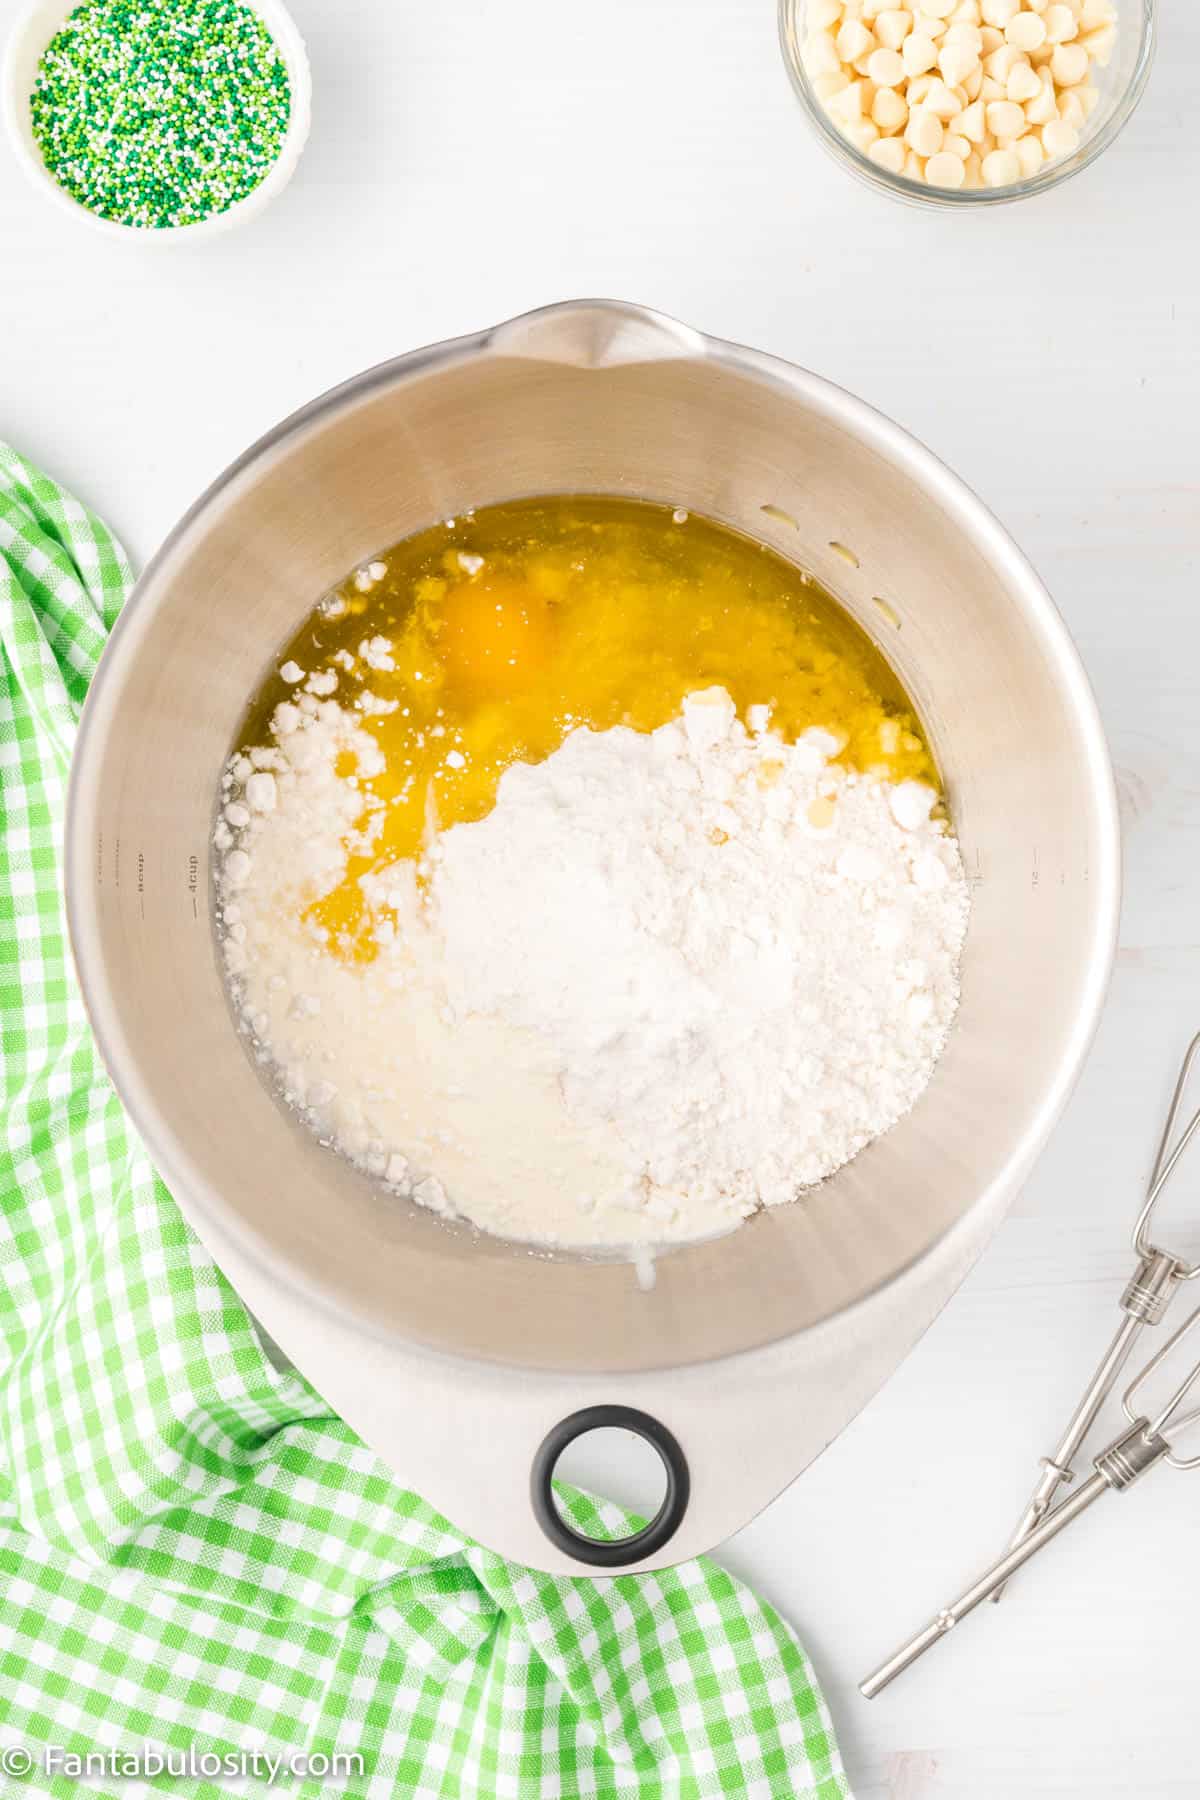 Cake mix, egg, oil, water, whipping cream in a large bowl.